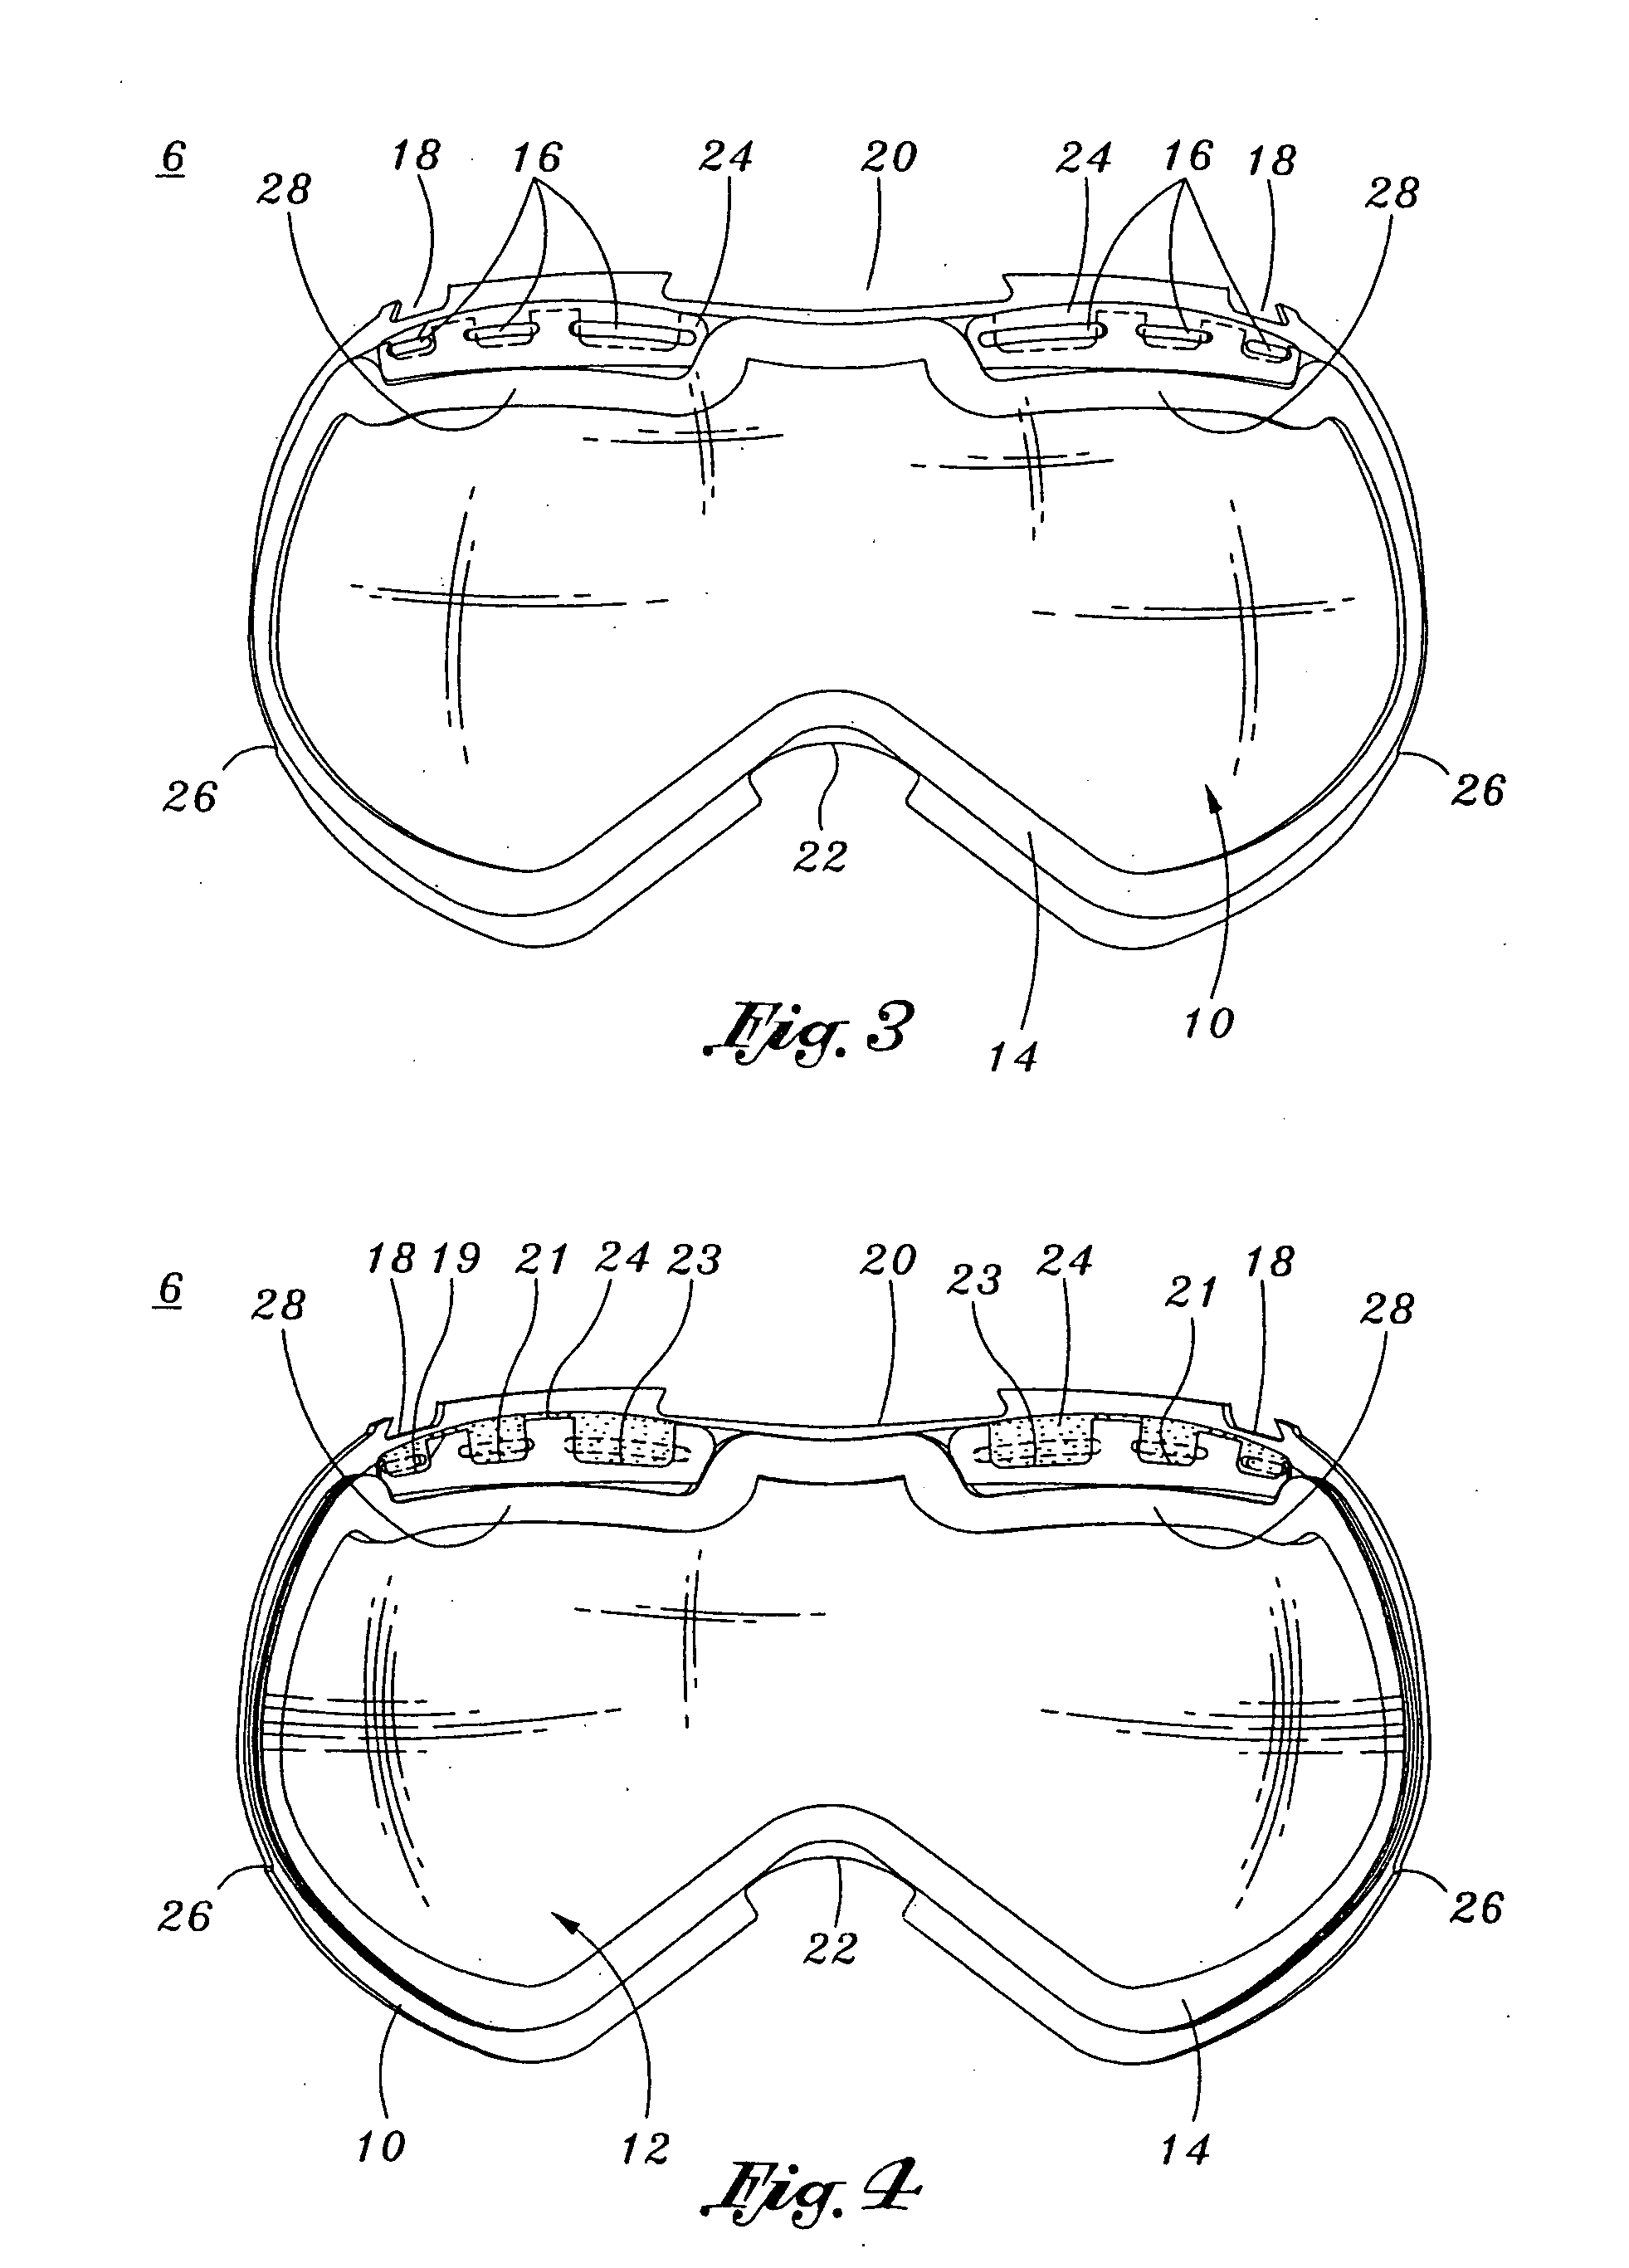 Apparatus and methodology to mitigate fogging on dual lens sports goggle